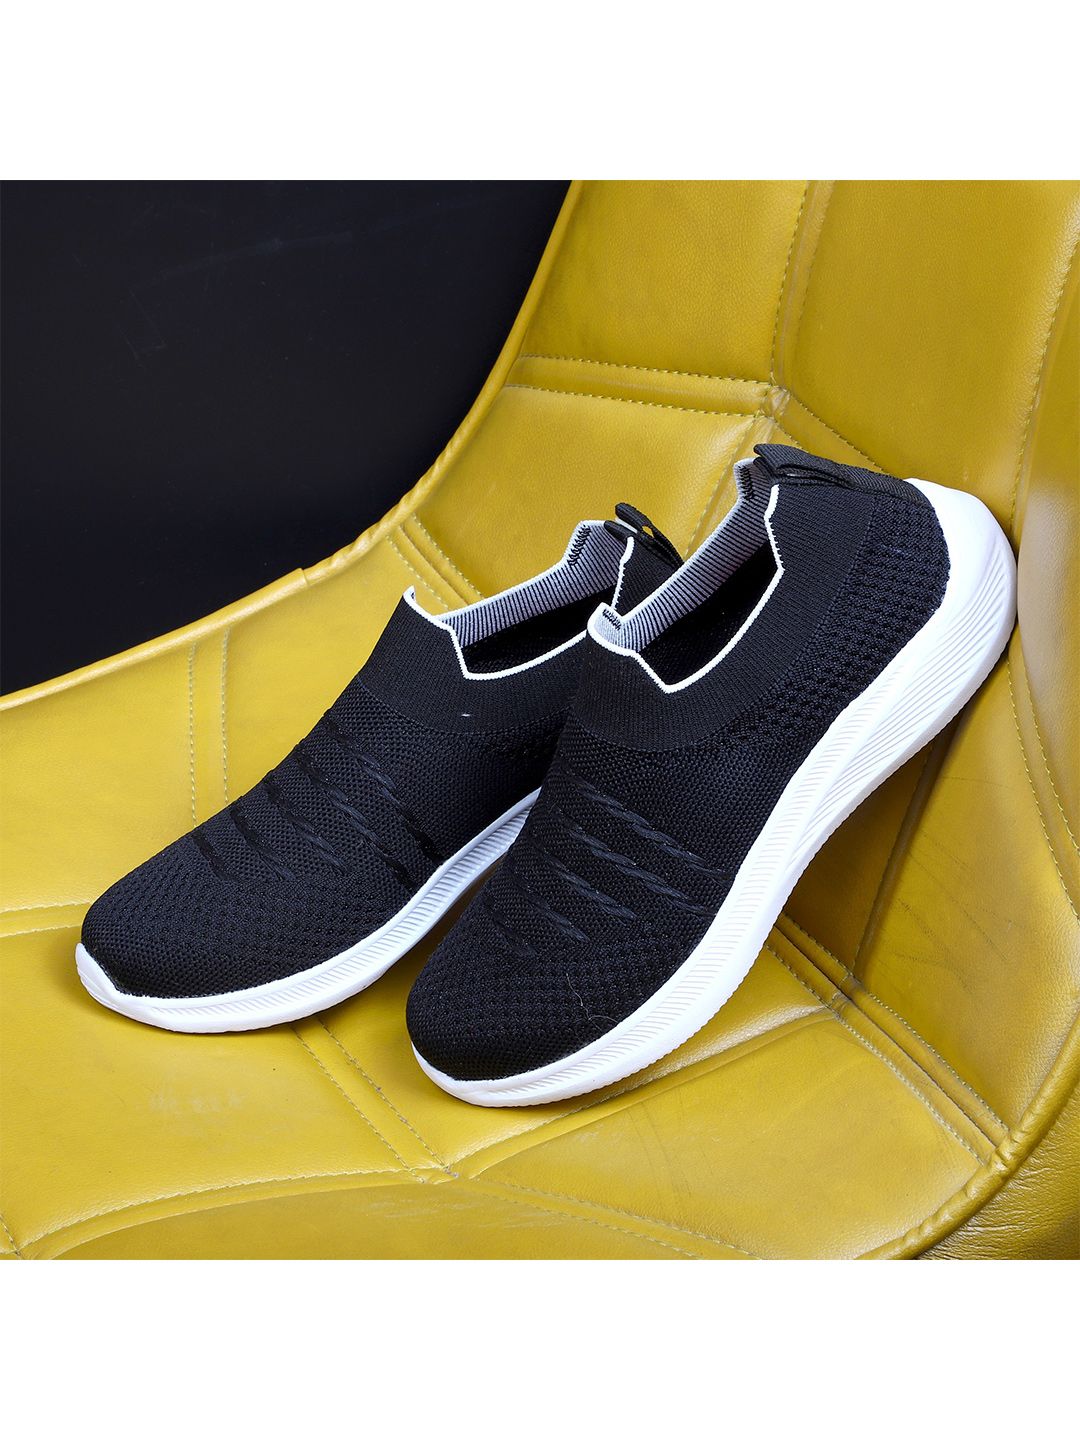 TPENT Women Black Mesh Running Non-Marking Shoes Price in India